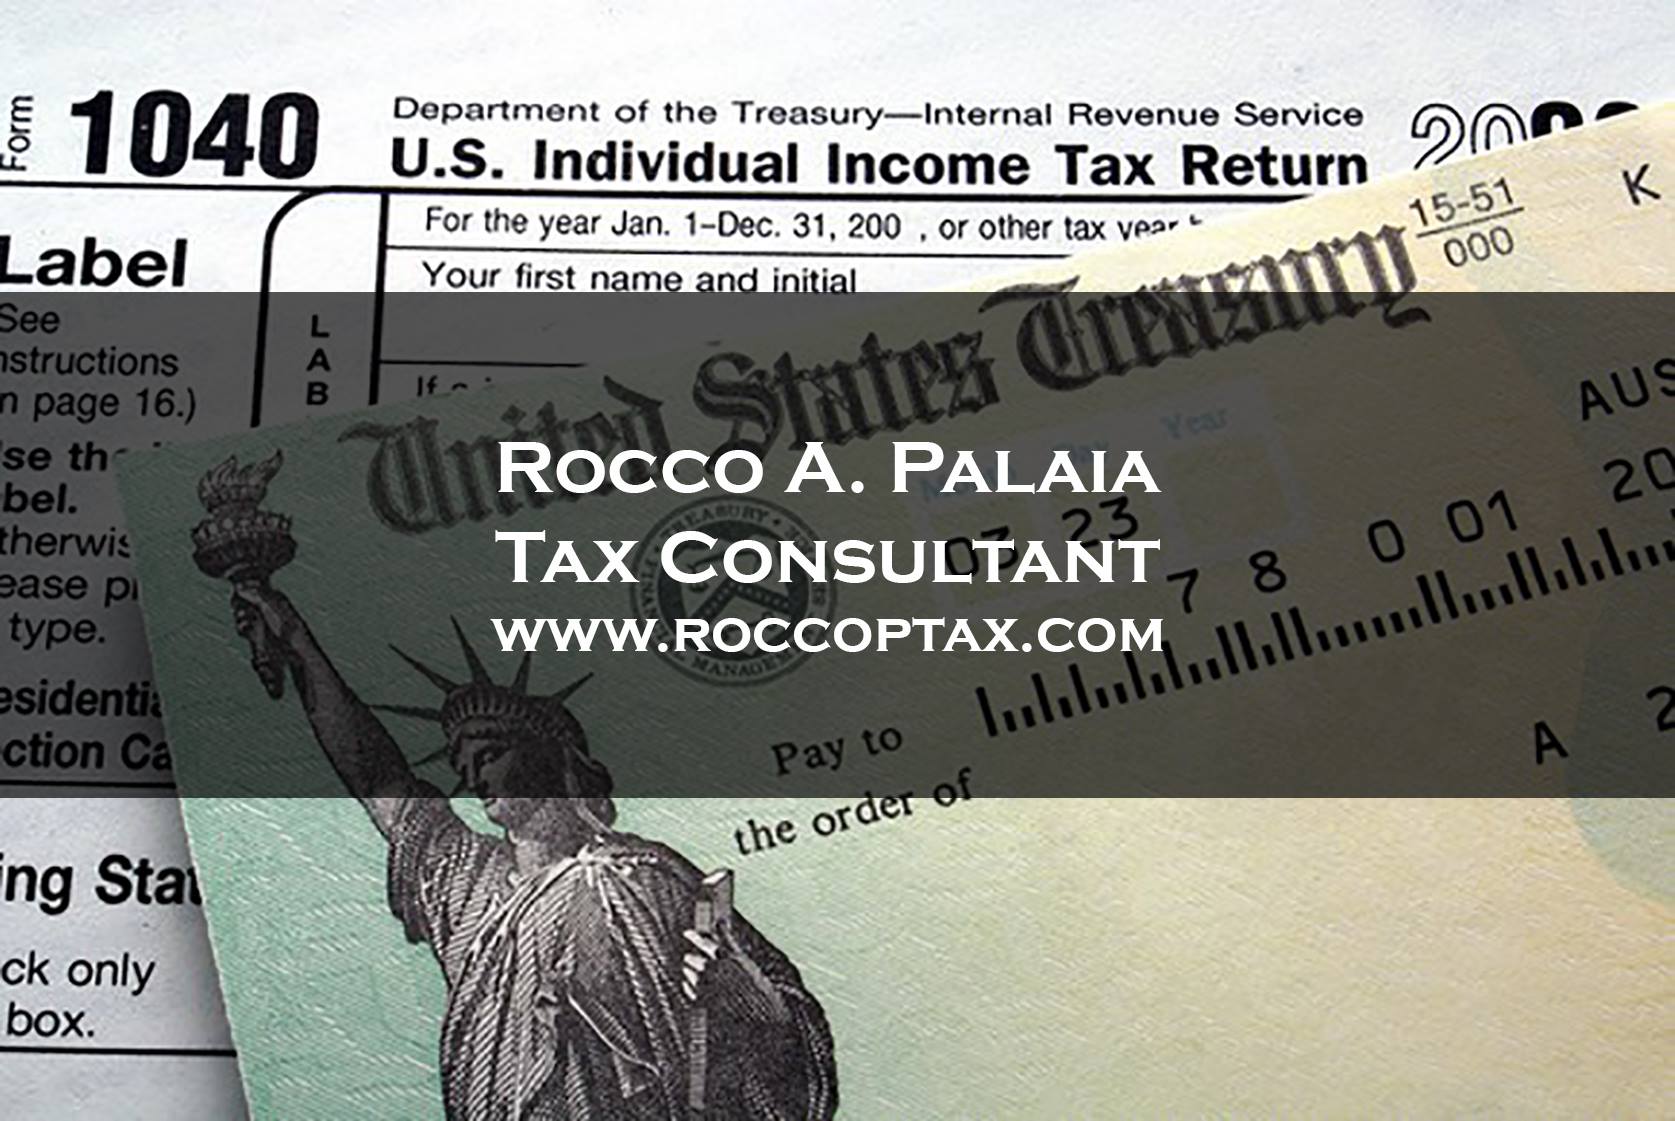 Rocco A. Palaia Tax Consultant 204 Warren Ave #203, Ho-Ho-Kus New Jersey 07423